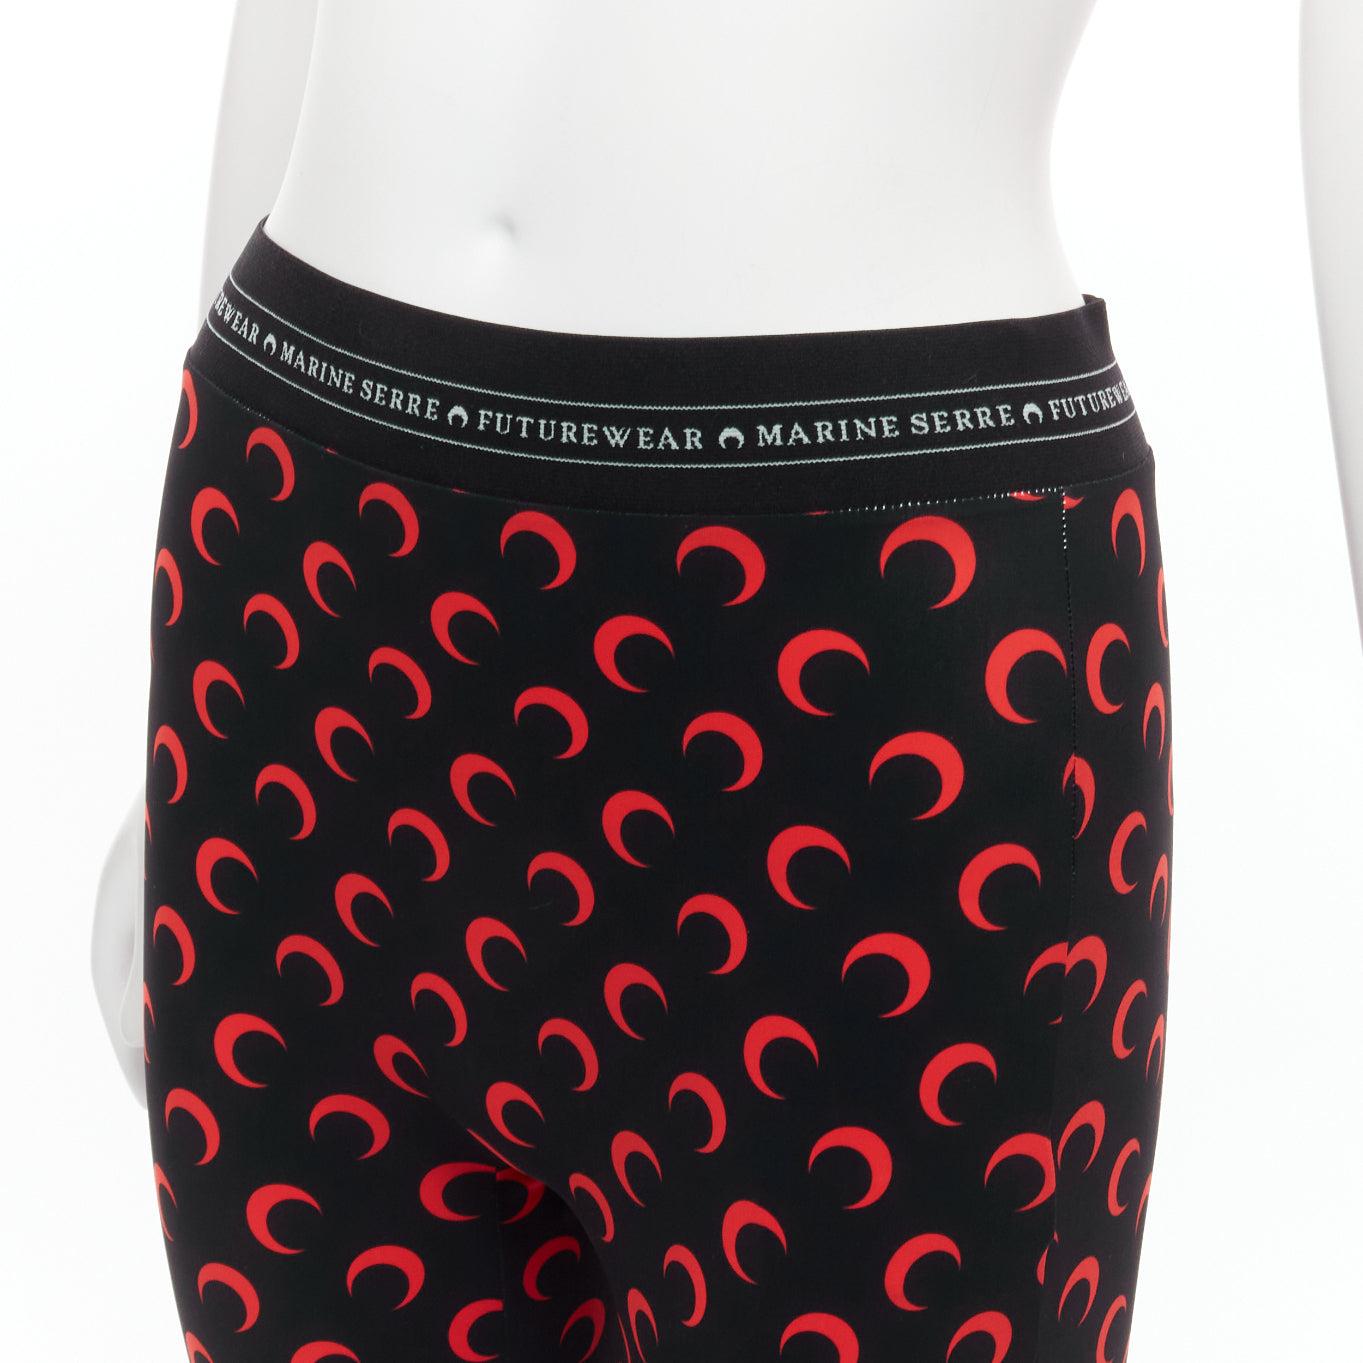 MARINE SERRE Whiteline Fuseaux Crescent Moon black red logo waist tights L
Reference: BSHW/A00043
Brand: Marine Serre
Collection: SS 2019
Material: Polyamide, Blend
Color: Black, Red
Pattern: Abstract
Closure: Elasticated
Made in: